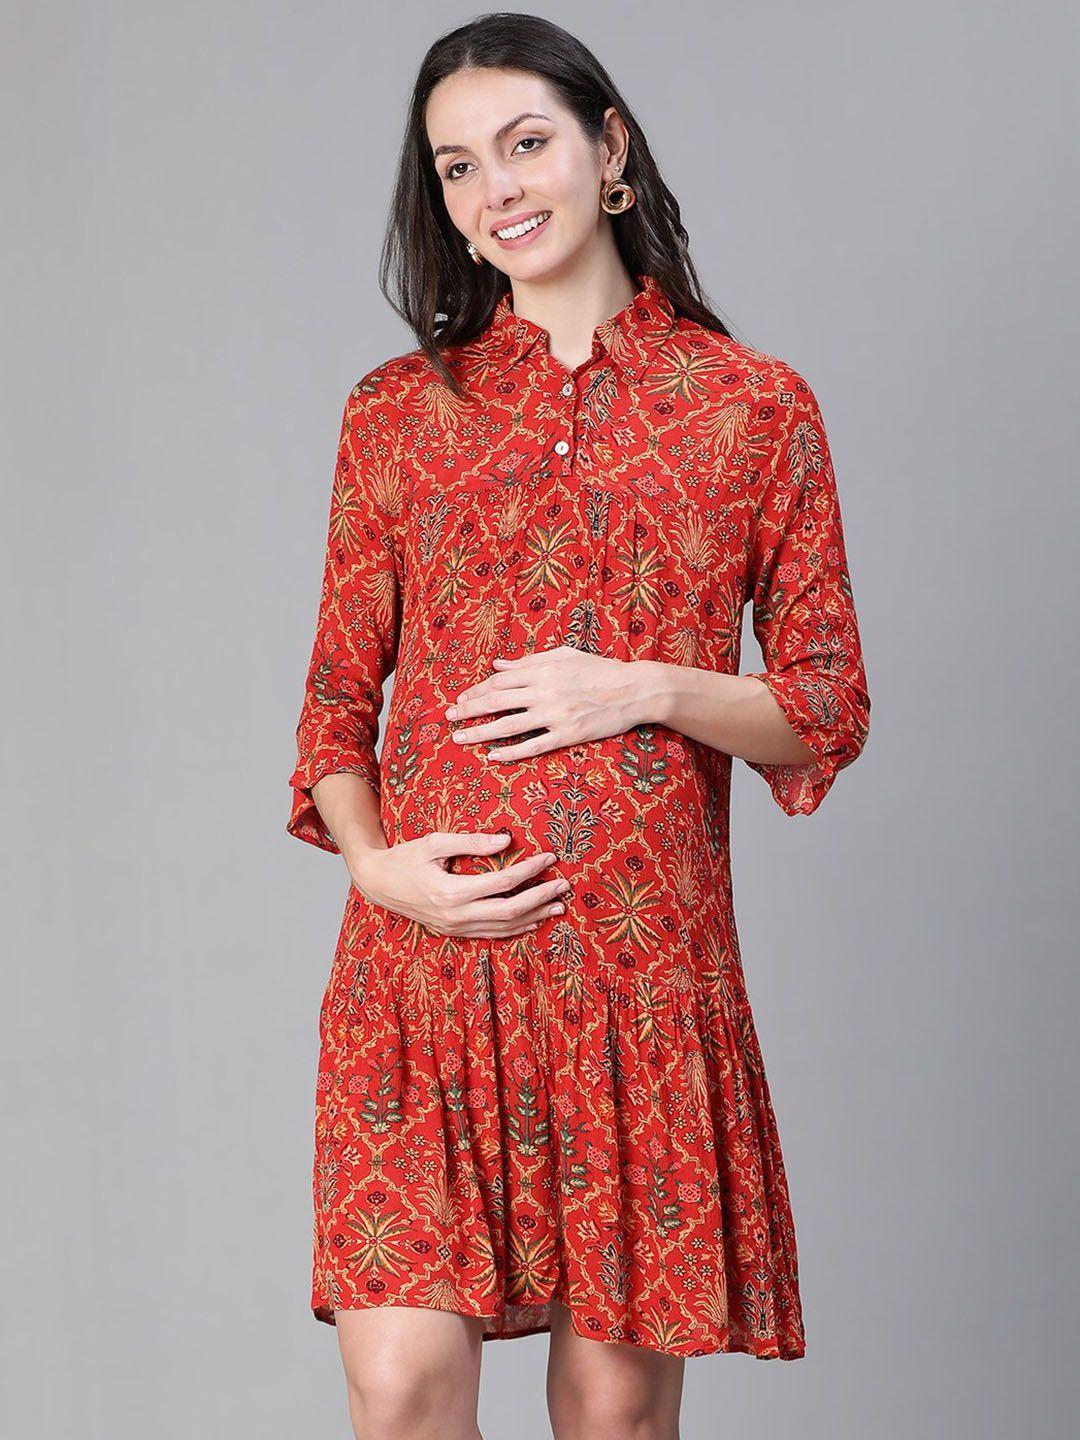 oxolloxo floral printed maternity shirt dress